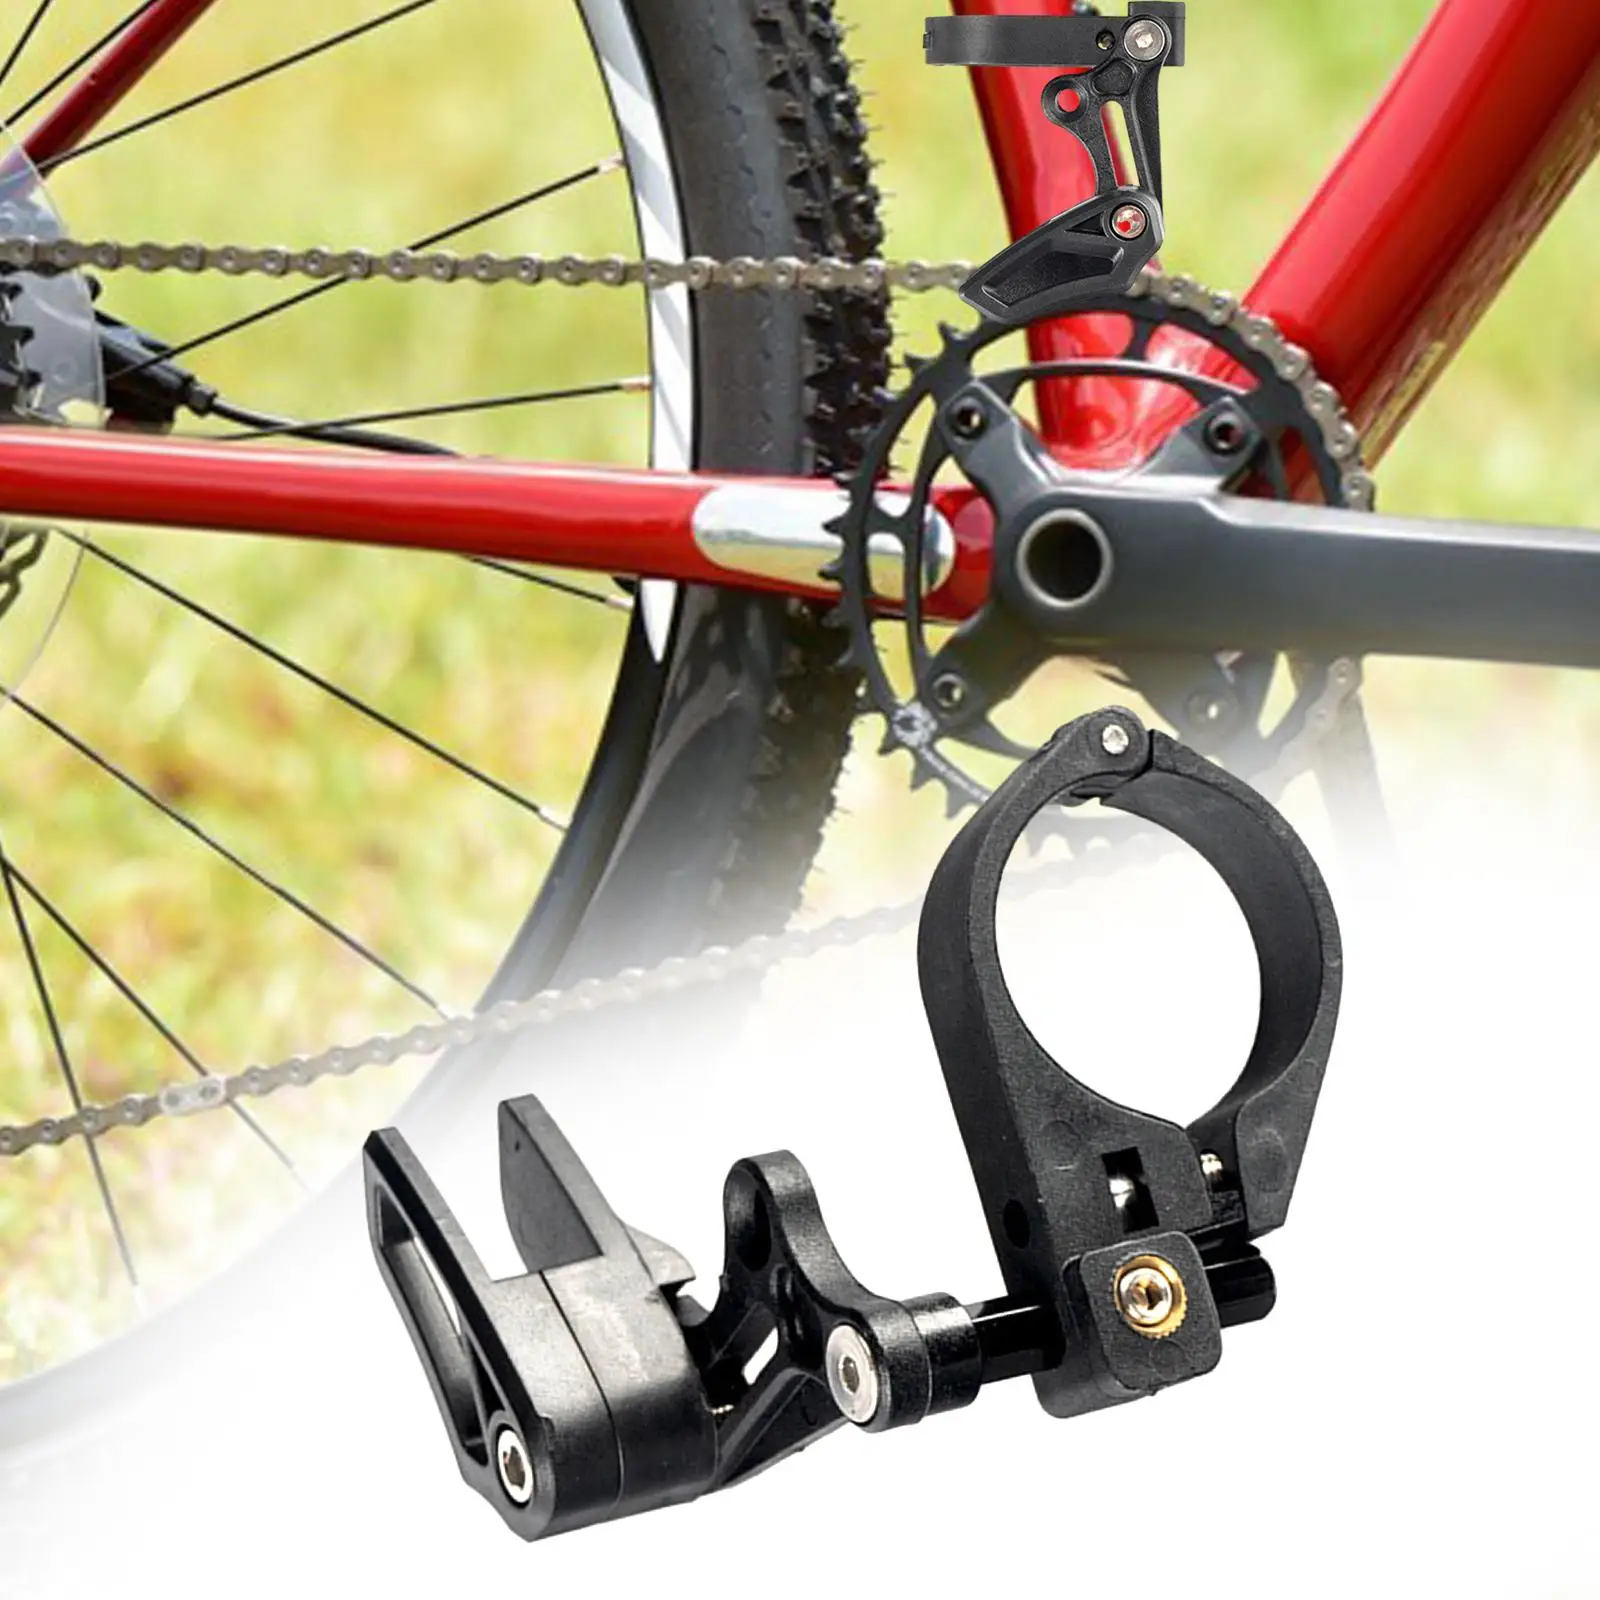 Bicycle Chain Guide Bike Chain Guide Adjustable Chain Clamp Guard Prevent Drop Bicycle Chain Stabilizer for Road Mountain Bikes